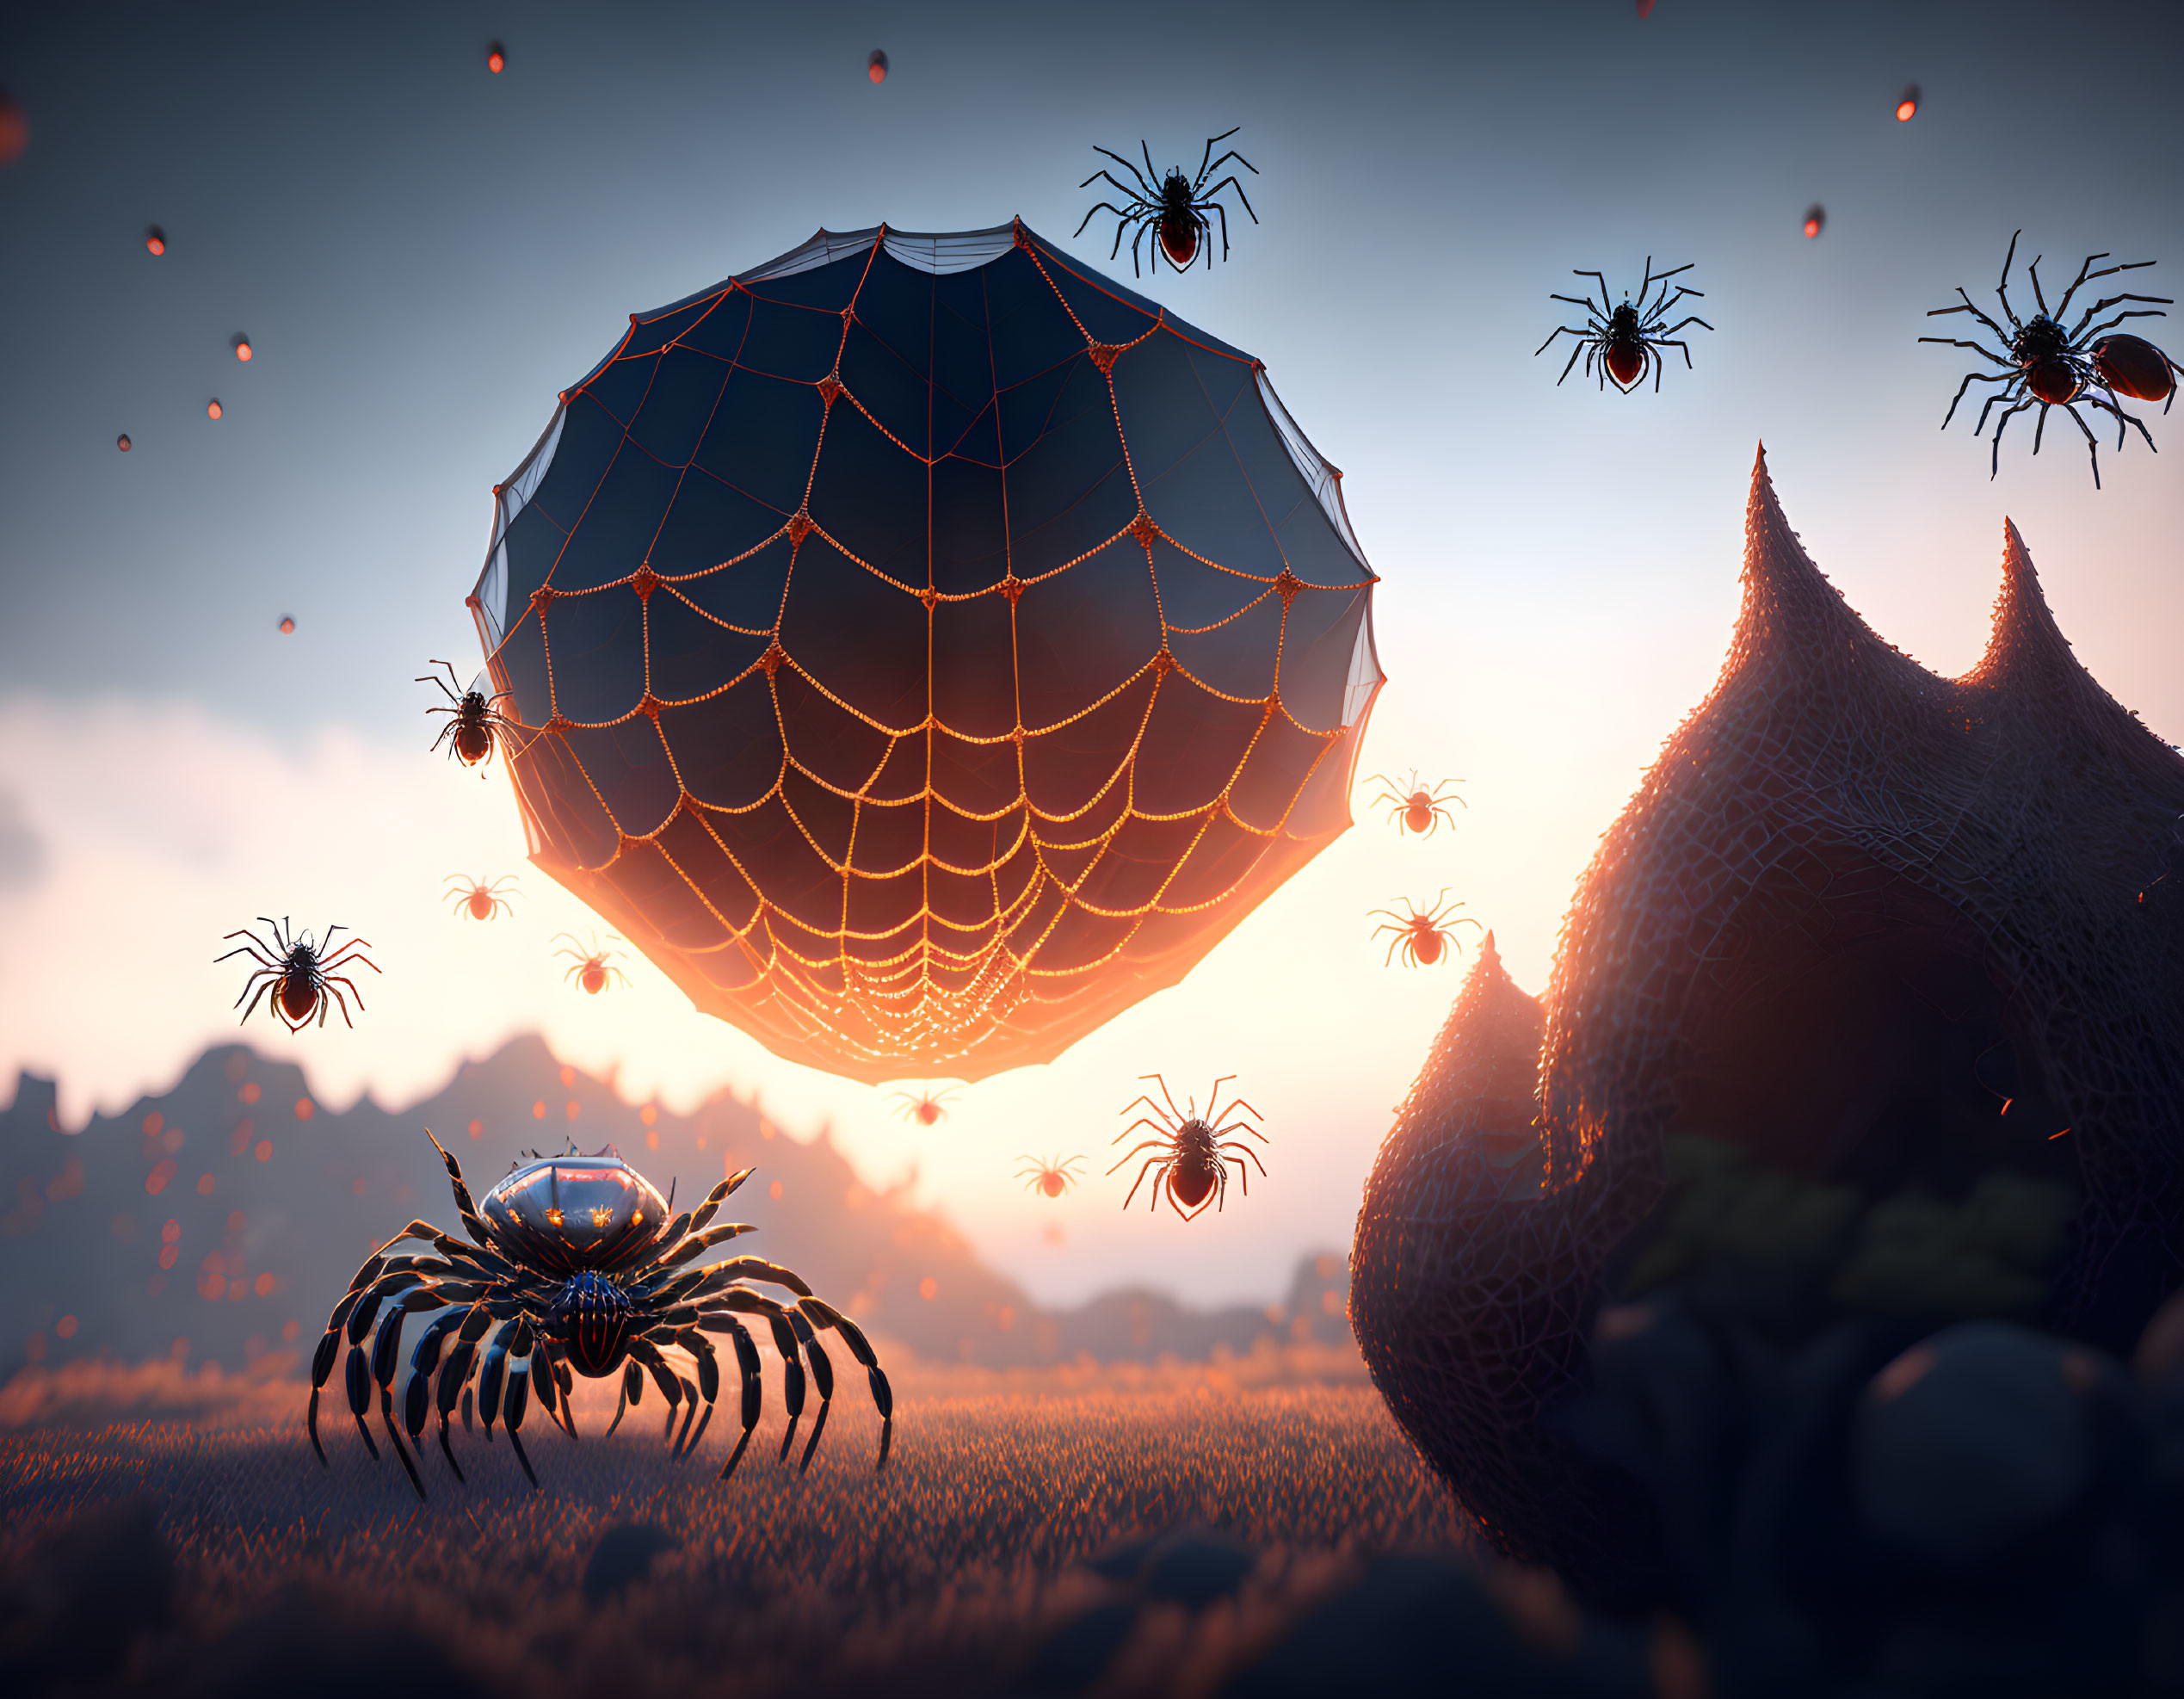 Surreal sunset scene with robotic spiders and floating web structure